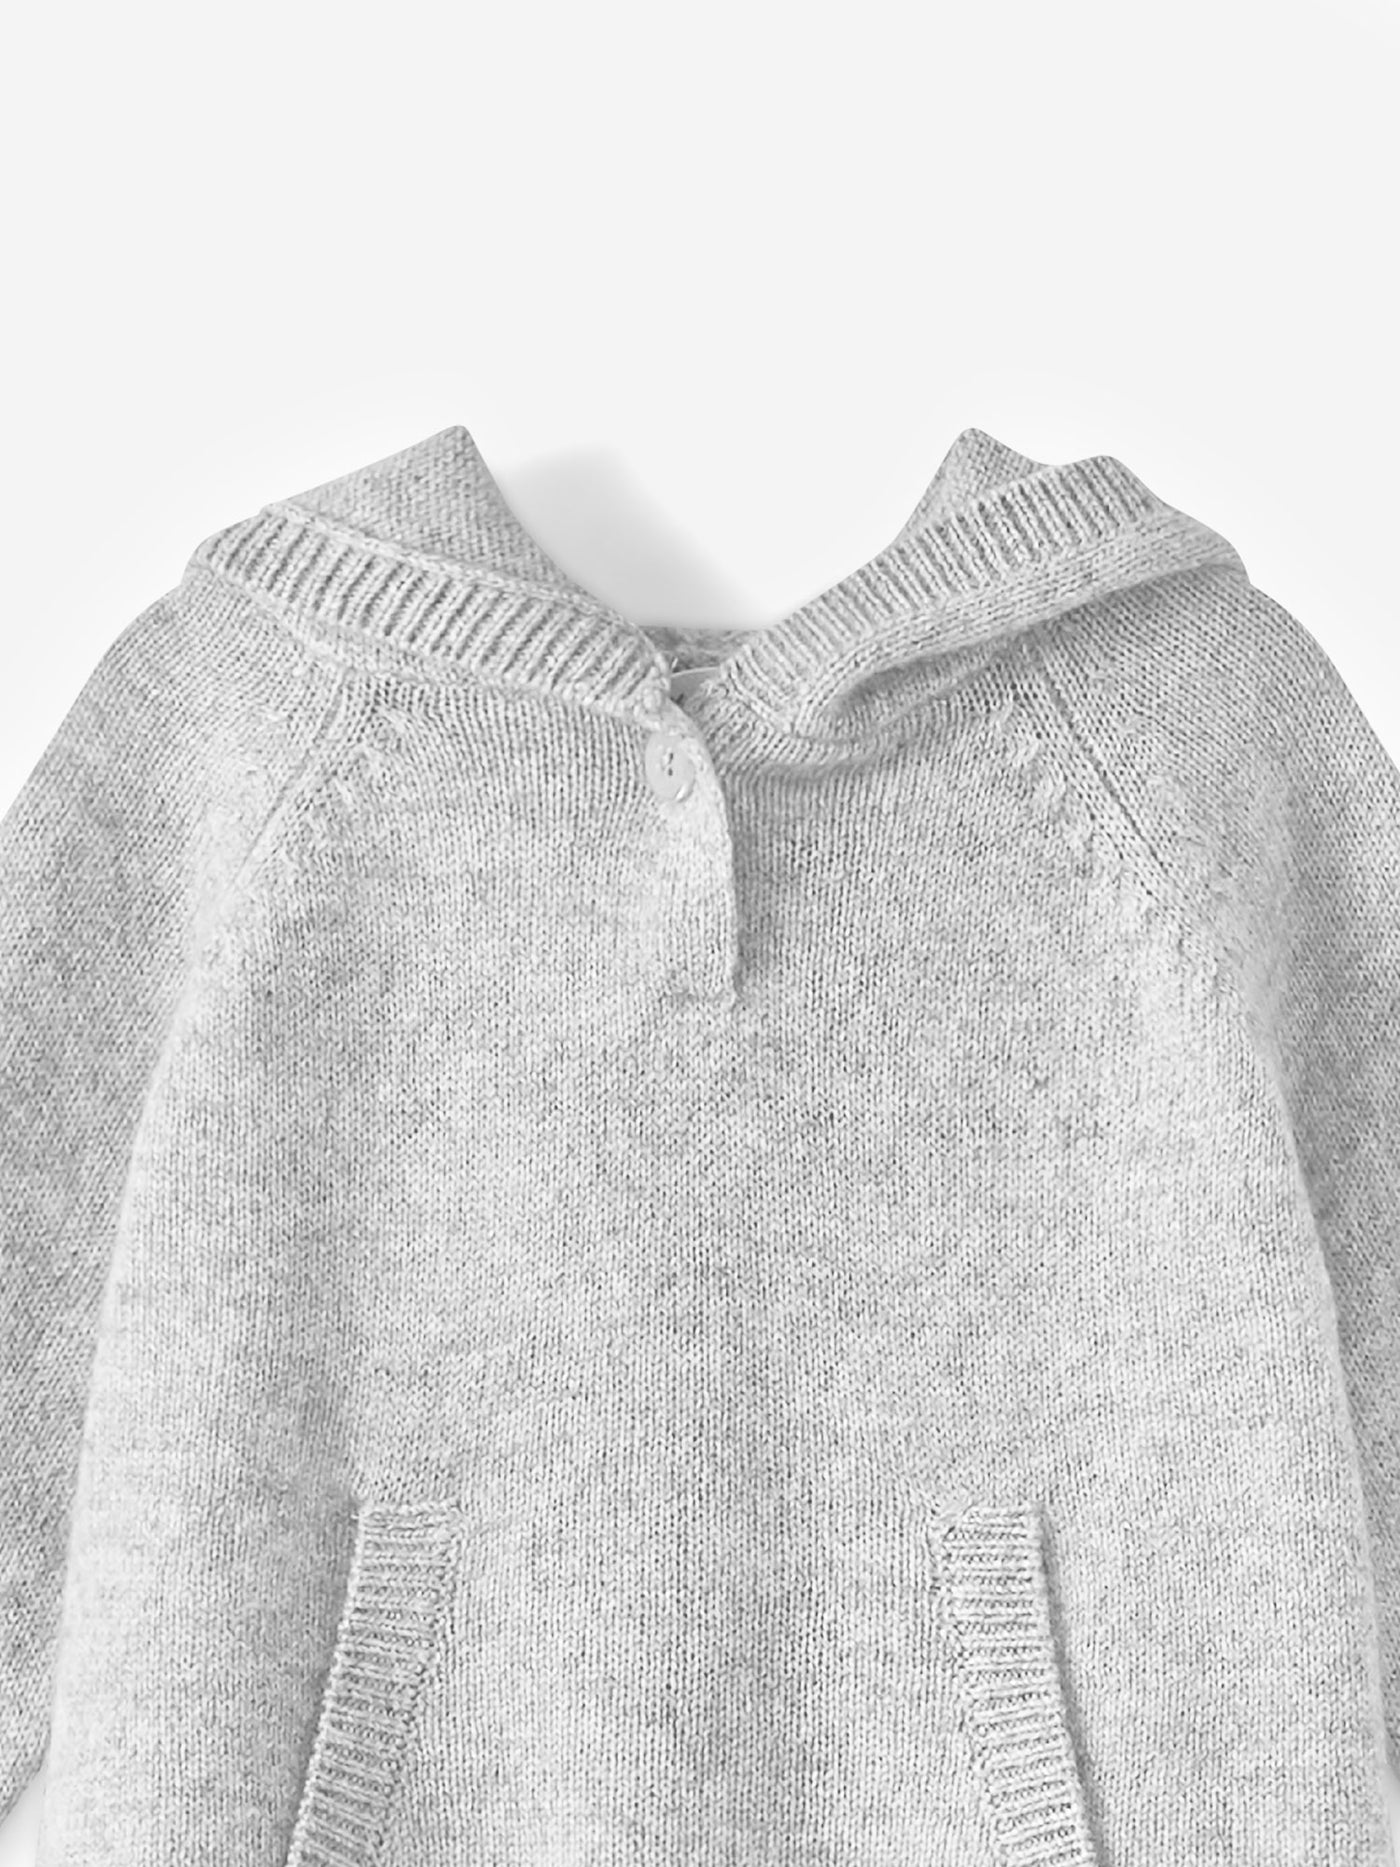 Baby Cashmere Sweater heathered gray  newborn sweaters and cardigans •  Bonpoint